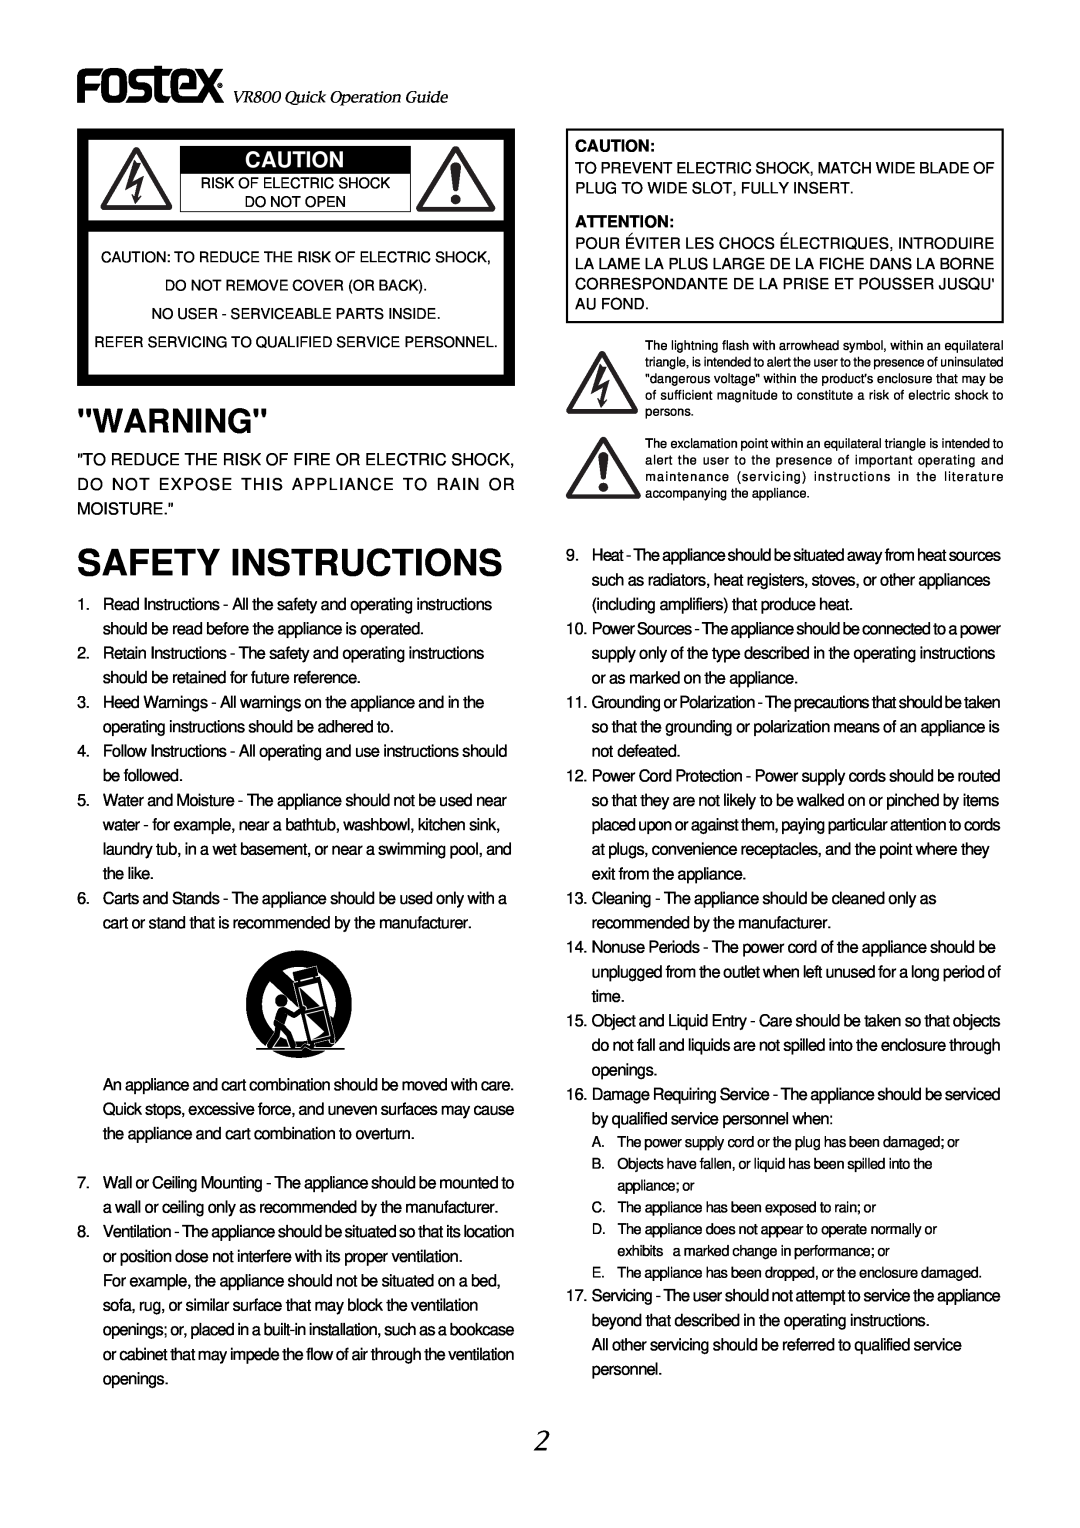 Fostex VR800 owner manual Safety Instructions 